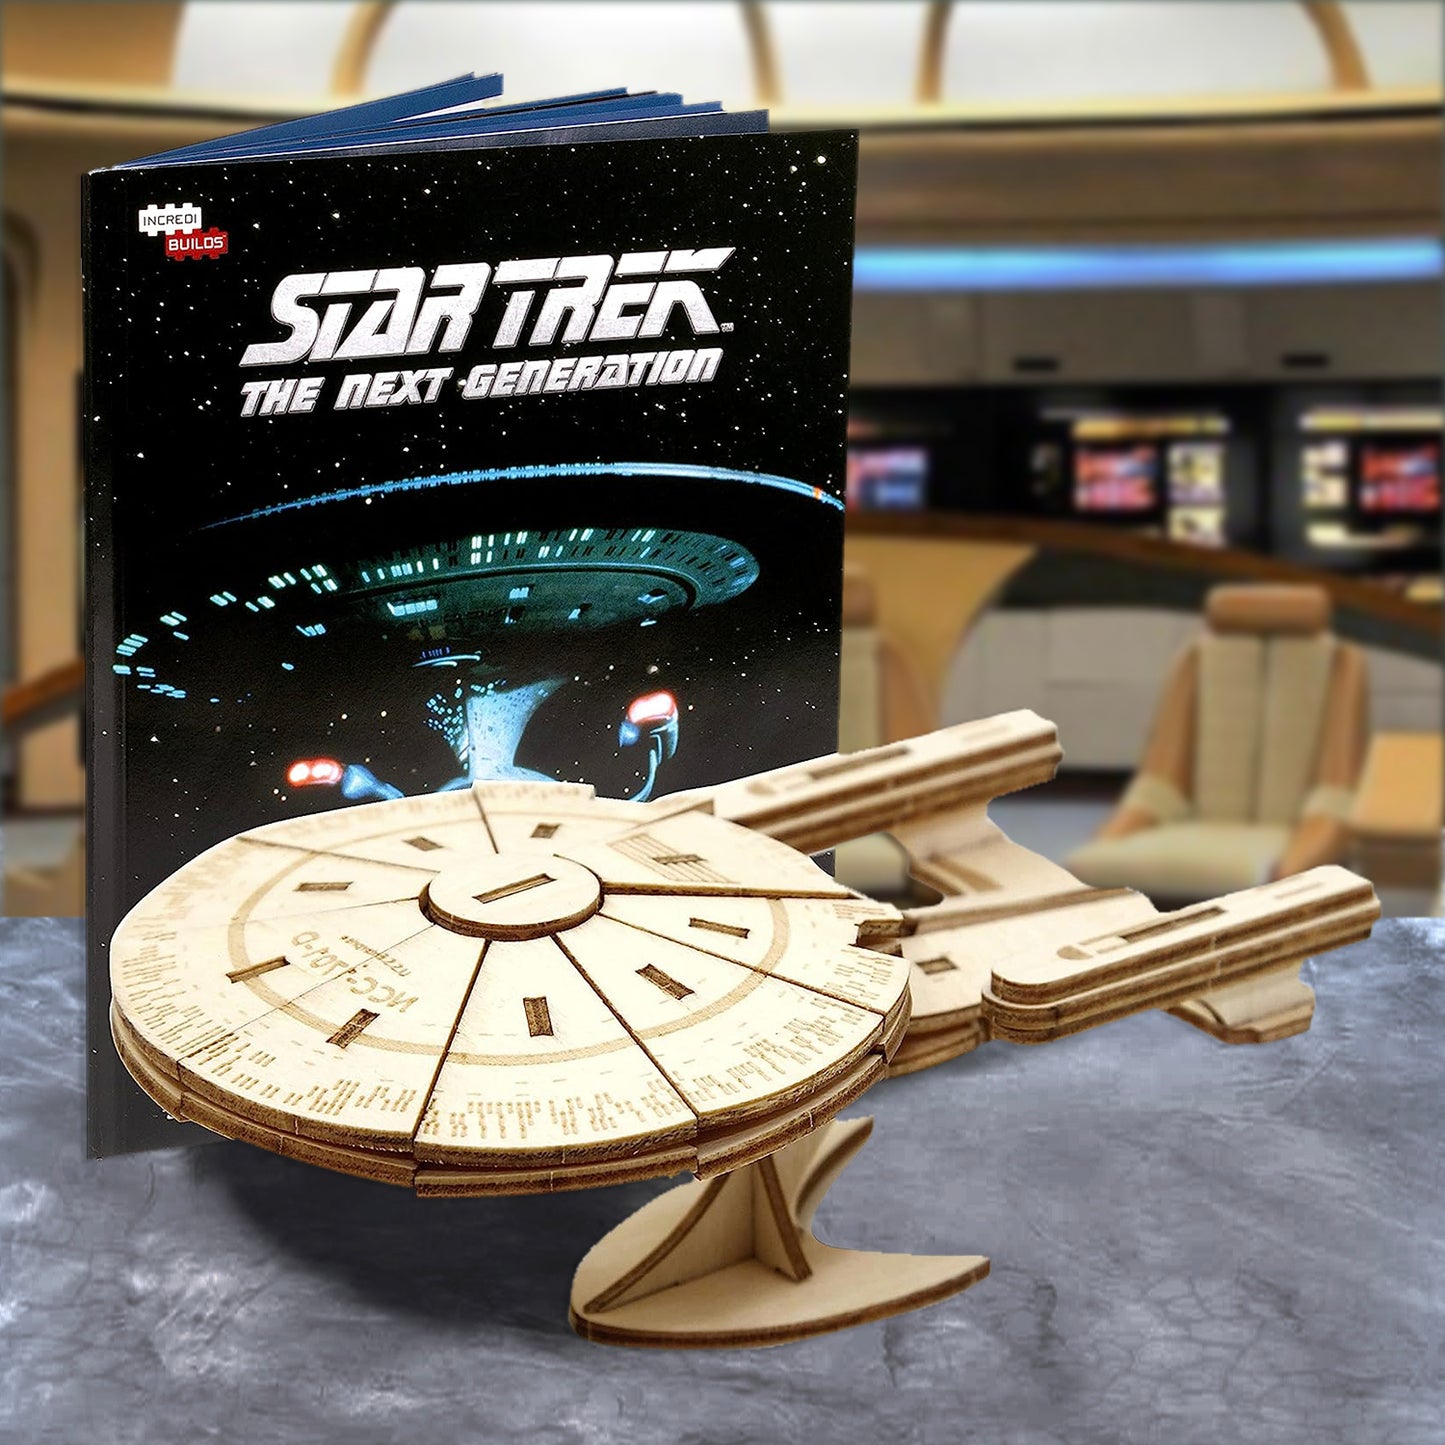 A wooden model of the Starship Enterprise, NCC-1701-D, from Star Trek The Next Generation. Next to the model is a guide book for assembly instructions. In the background is the bridge of the Enterprise.